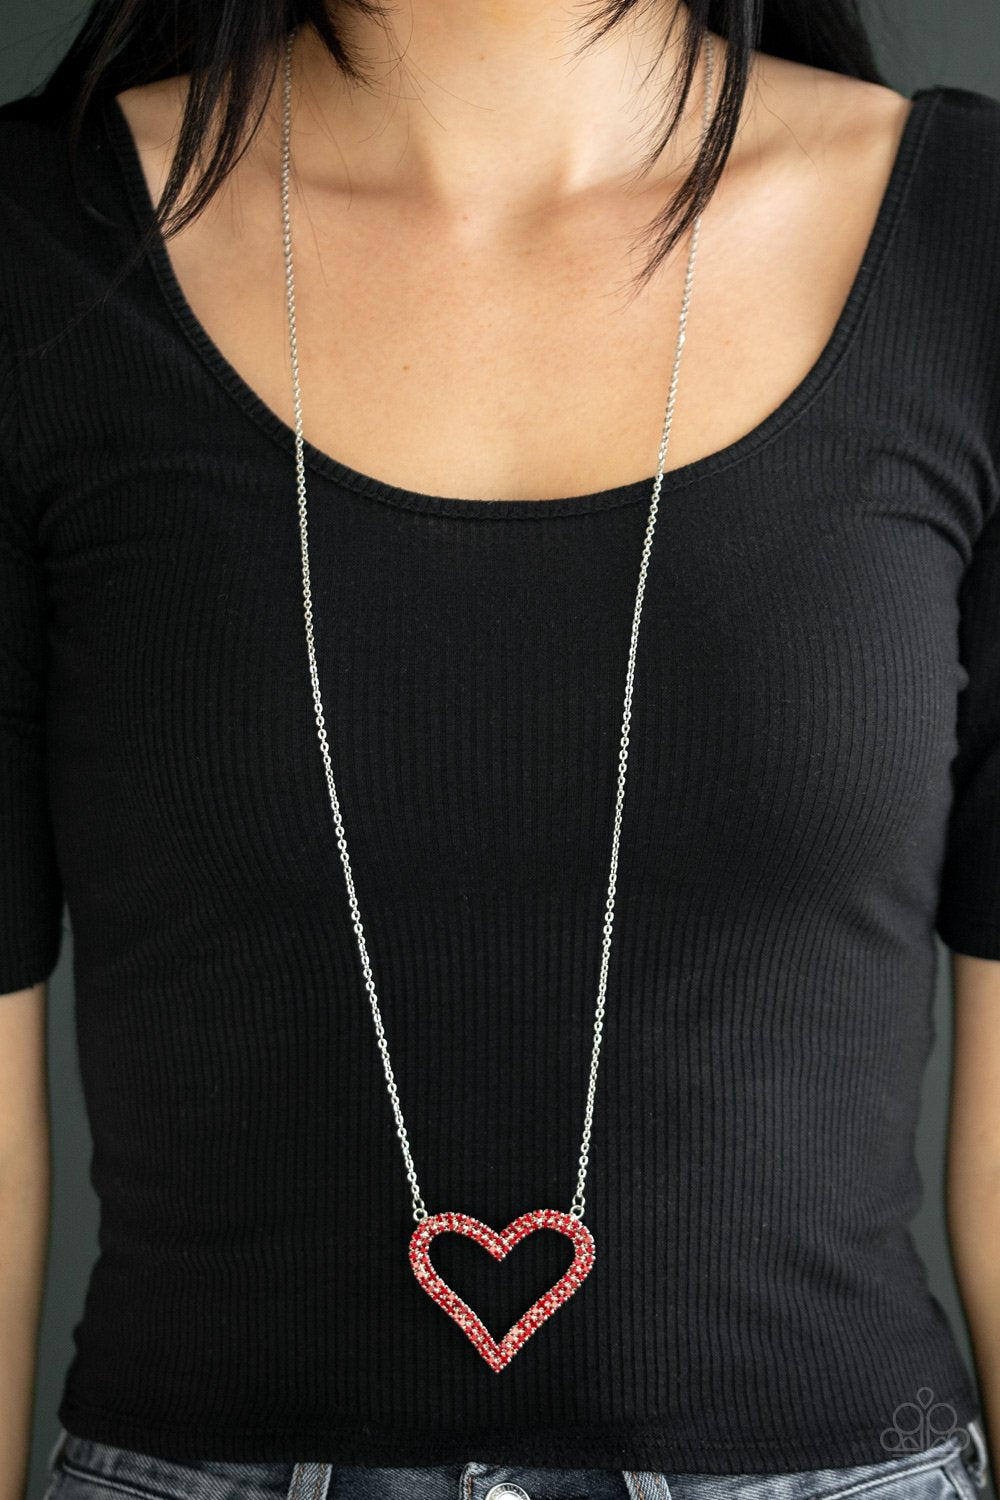 Pull Some HEART-strings-red-Paparazzi necklace